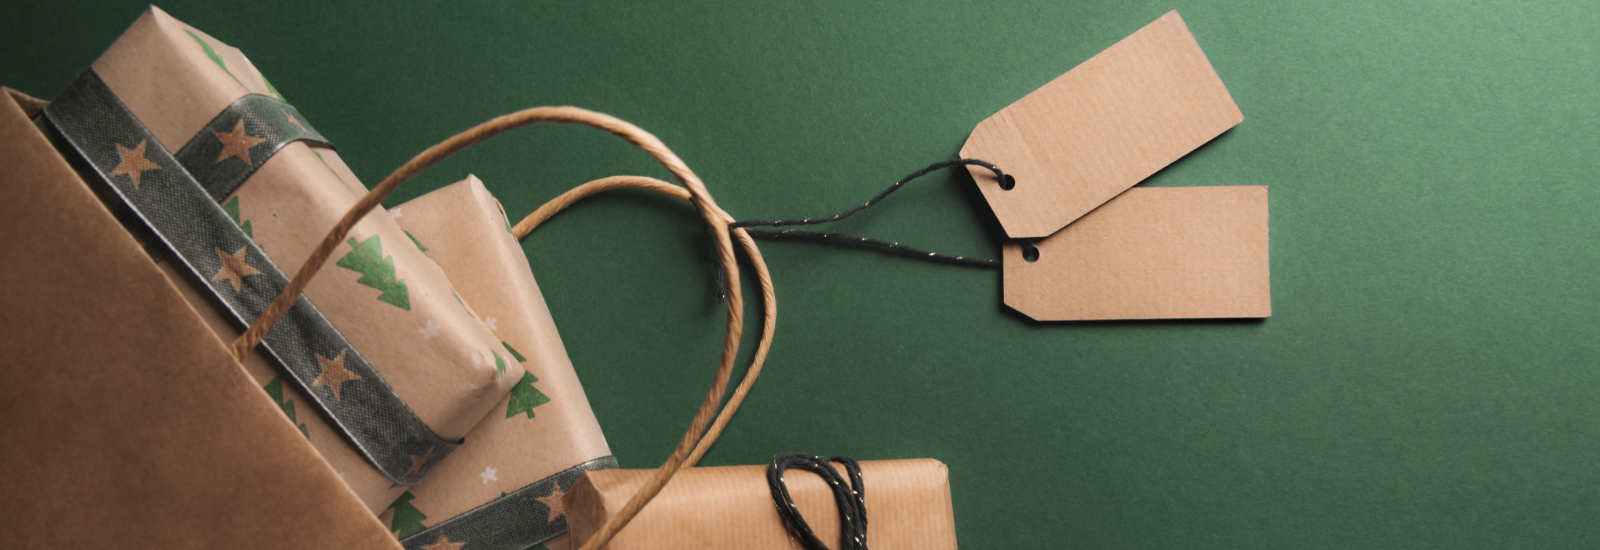 Presents wrapped in brown paper against a green background